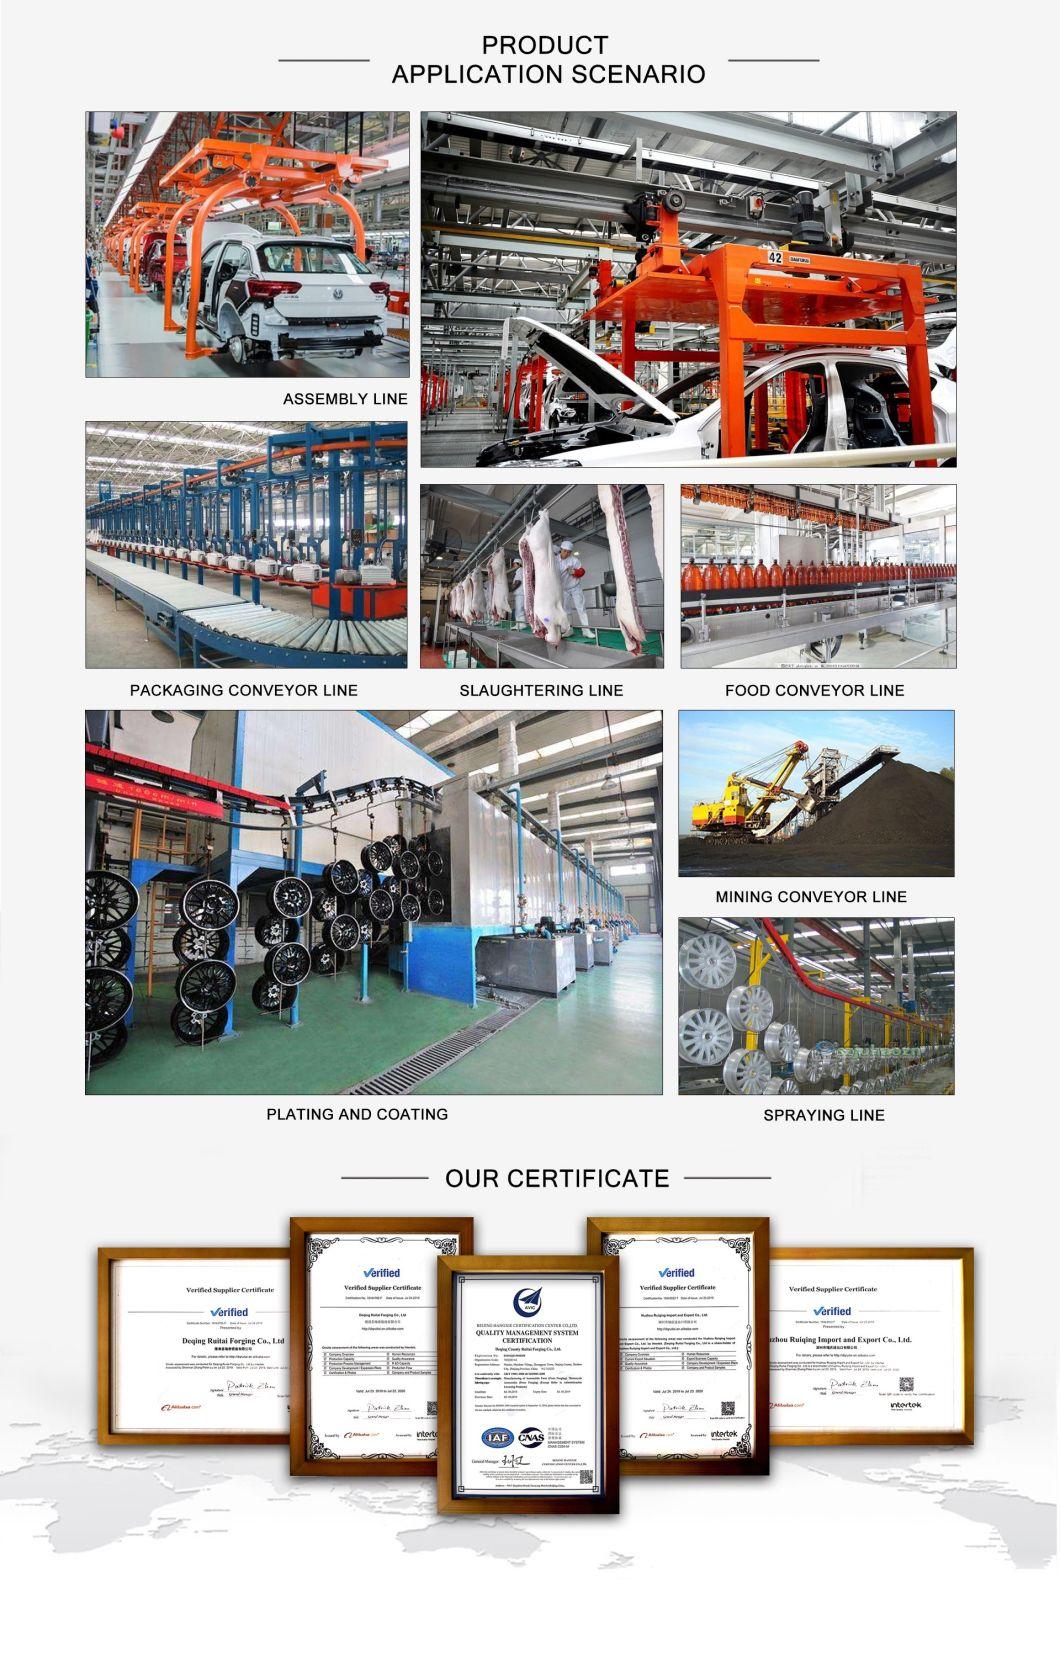 China Manufacturer of Drop Forged Spare Conveyor Scraper Chain Cast Chain and Industry Chain for Agriculture Forged Machinery Parts with Custom Service